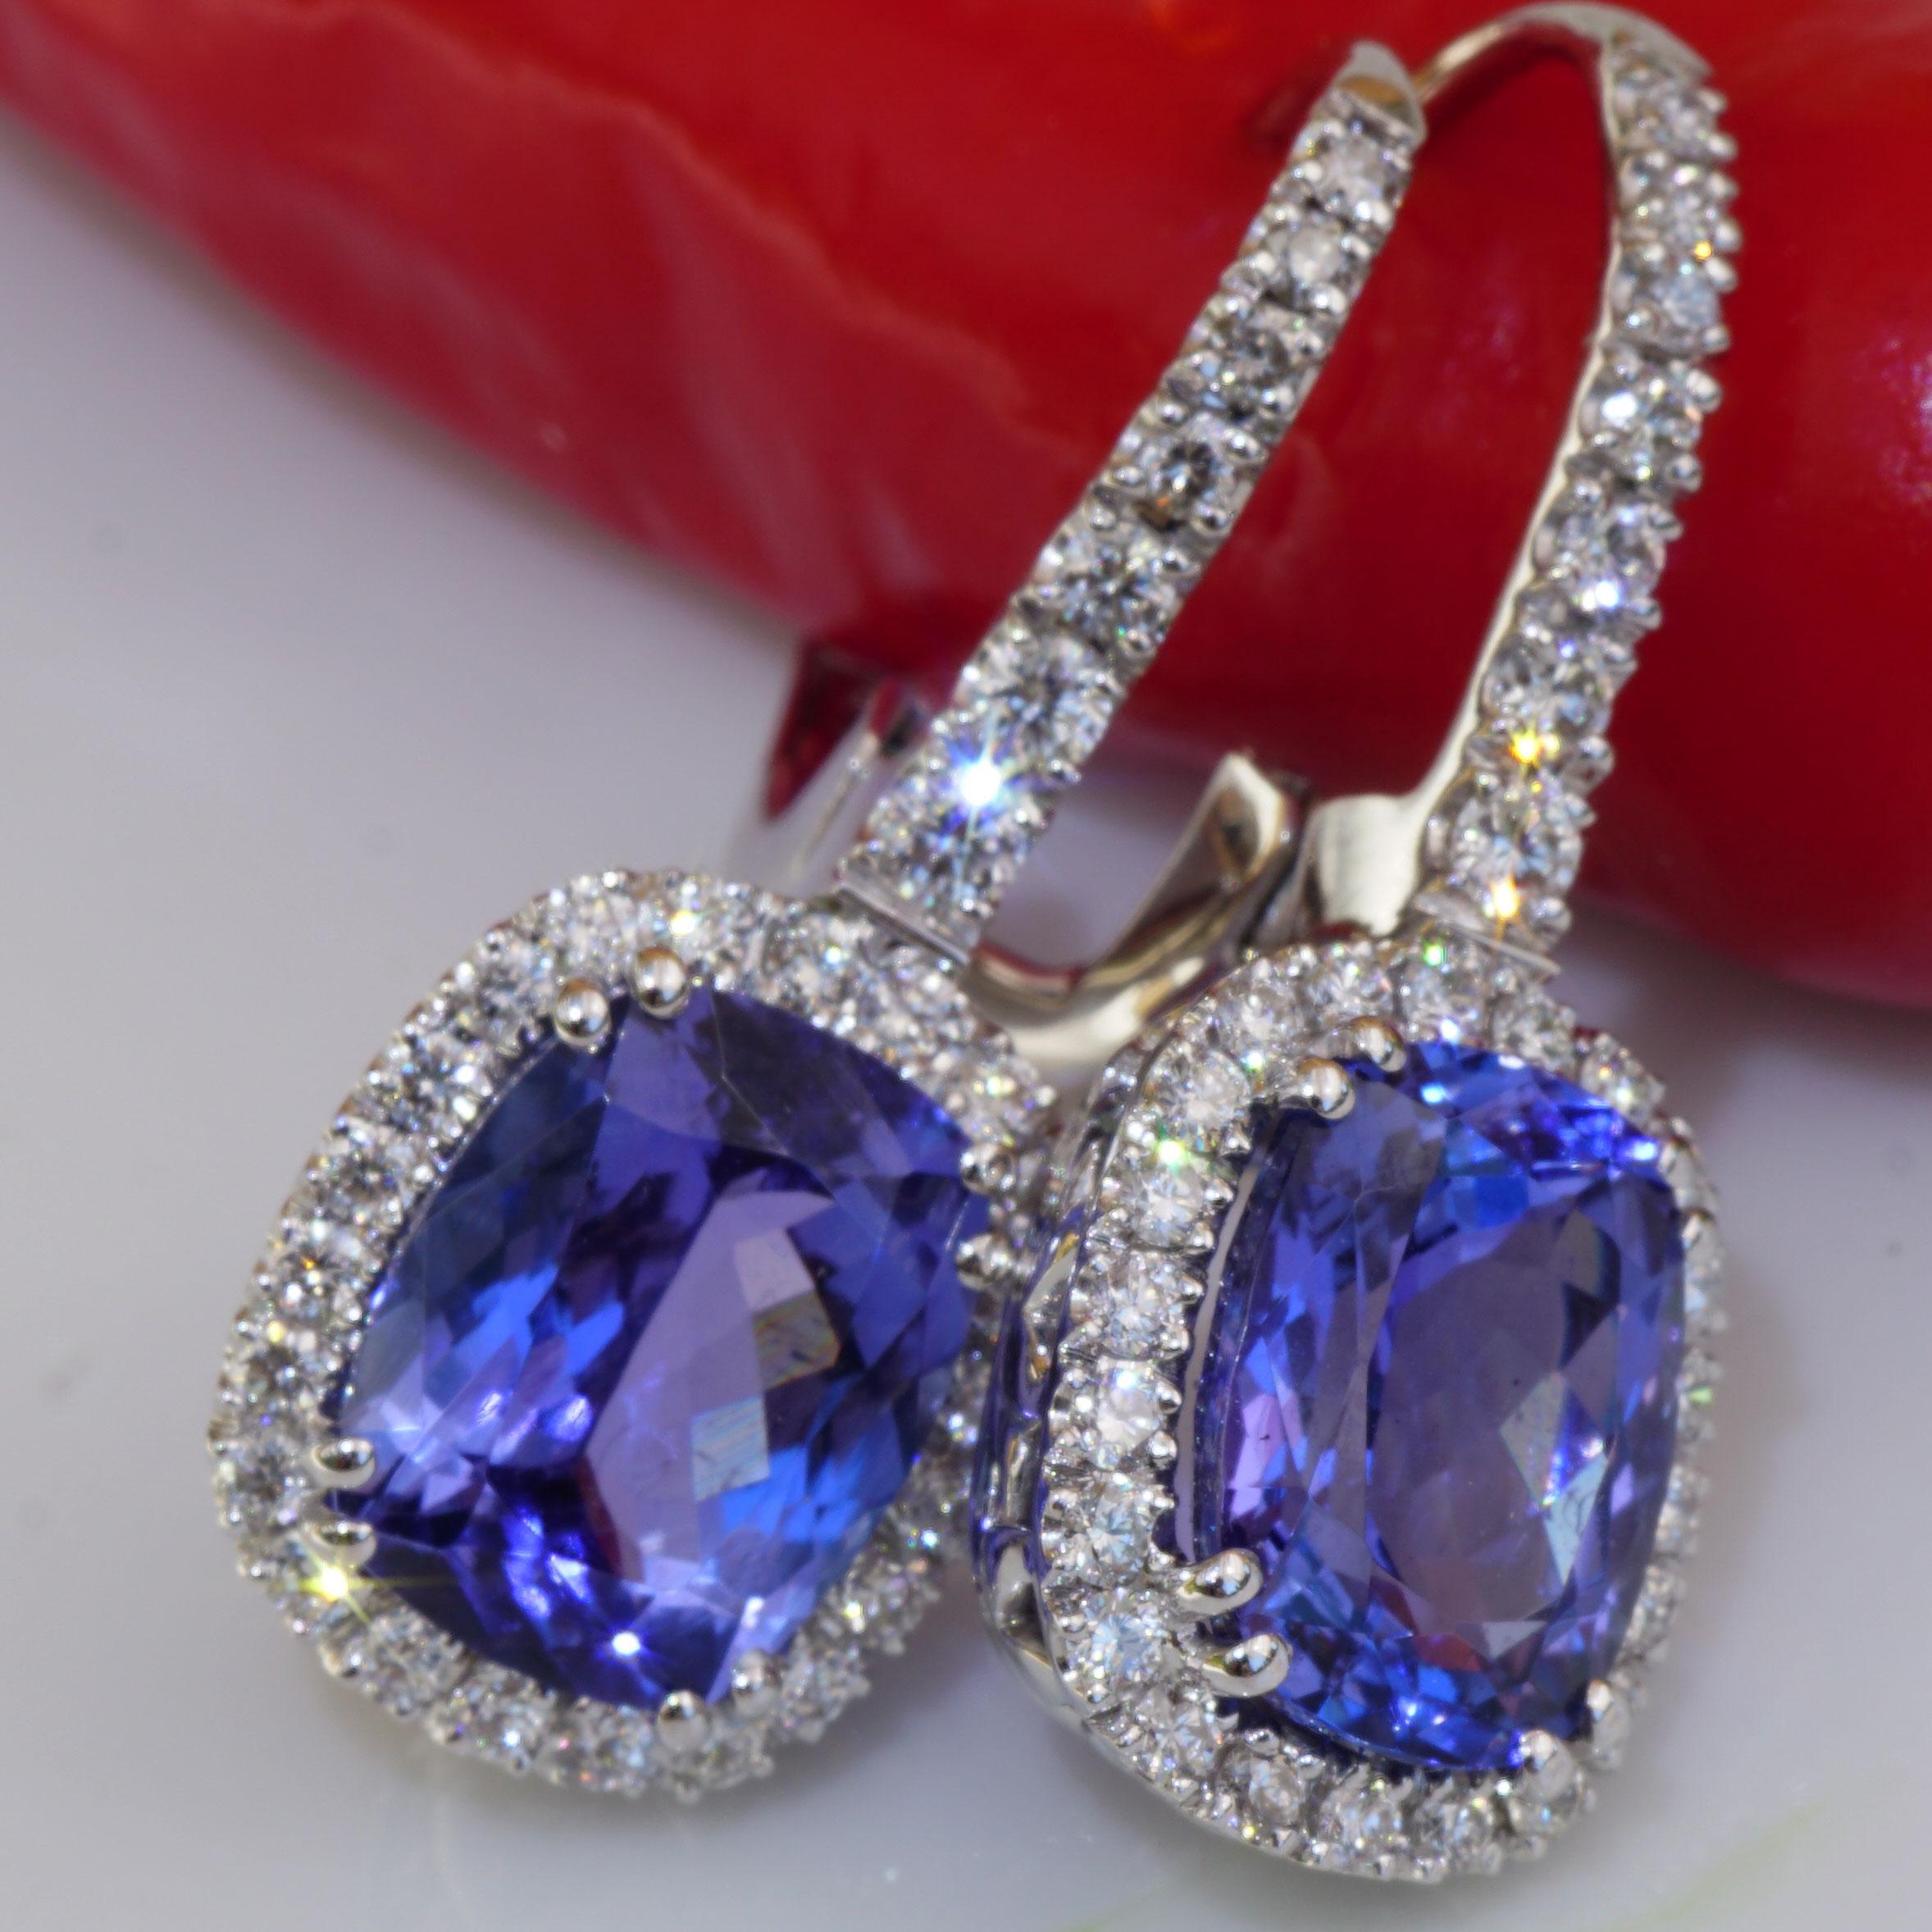 Modern Rectangular Tanzanite AAA+ 4.70 Ct Dream Earrings with Diamonds 18 Kt White Gold For Sale